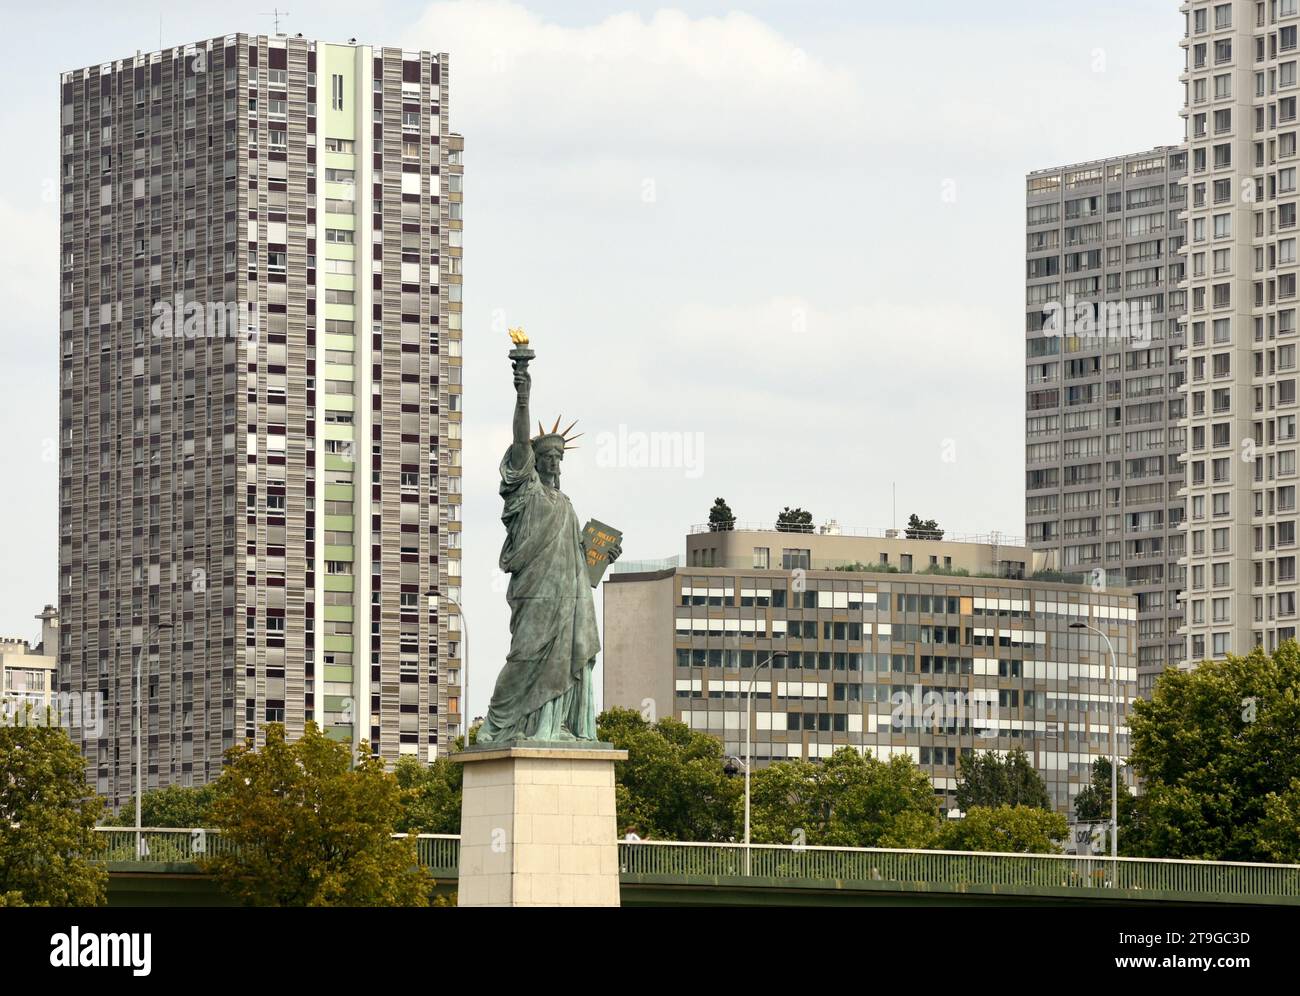 Paris, France - August 28, 2019: Statue of Liberty in Paris. The replica Statue of Liberty located on Pont de Grenelle in Paris, France. Stock Photo